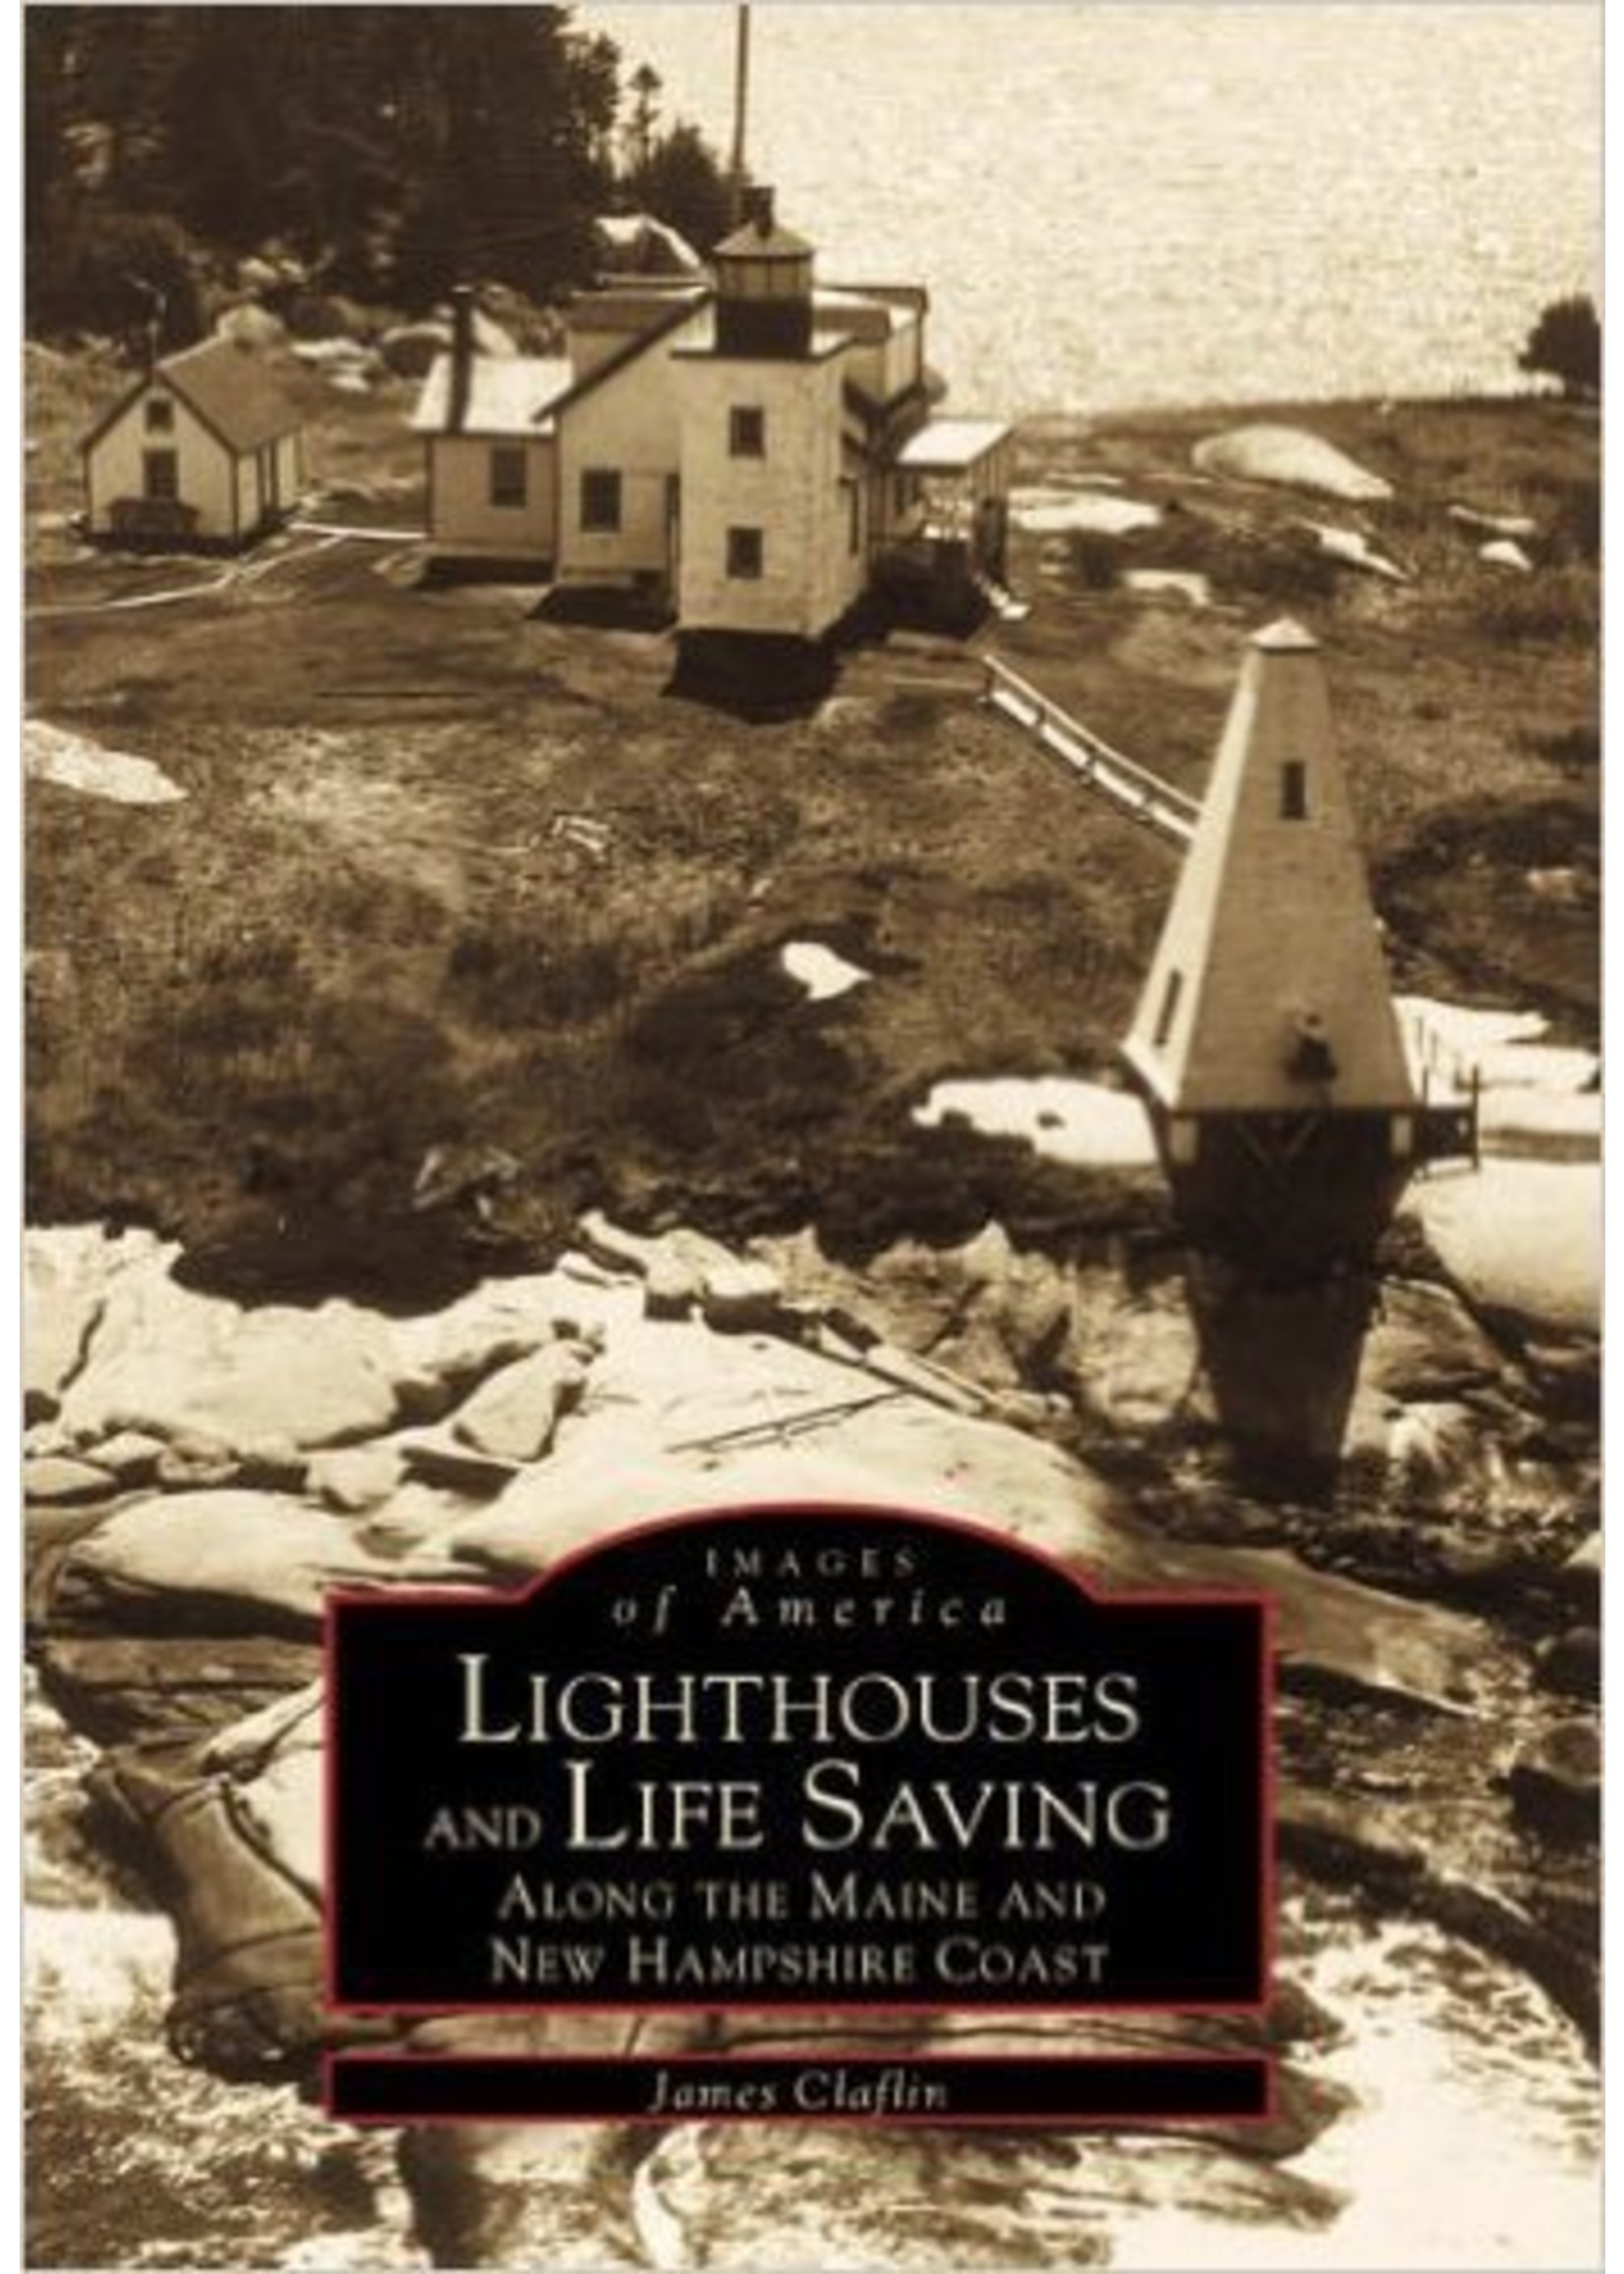 Images of America Lighthouses and Life Savings Along the Maine and New Hampshire Coast